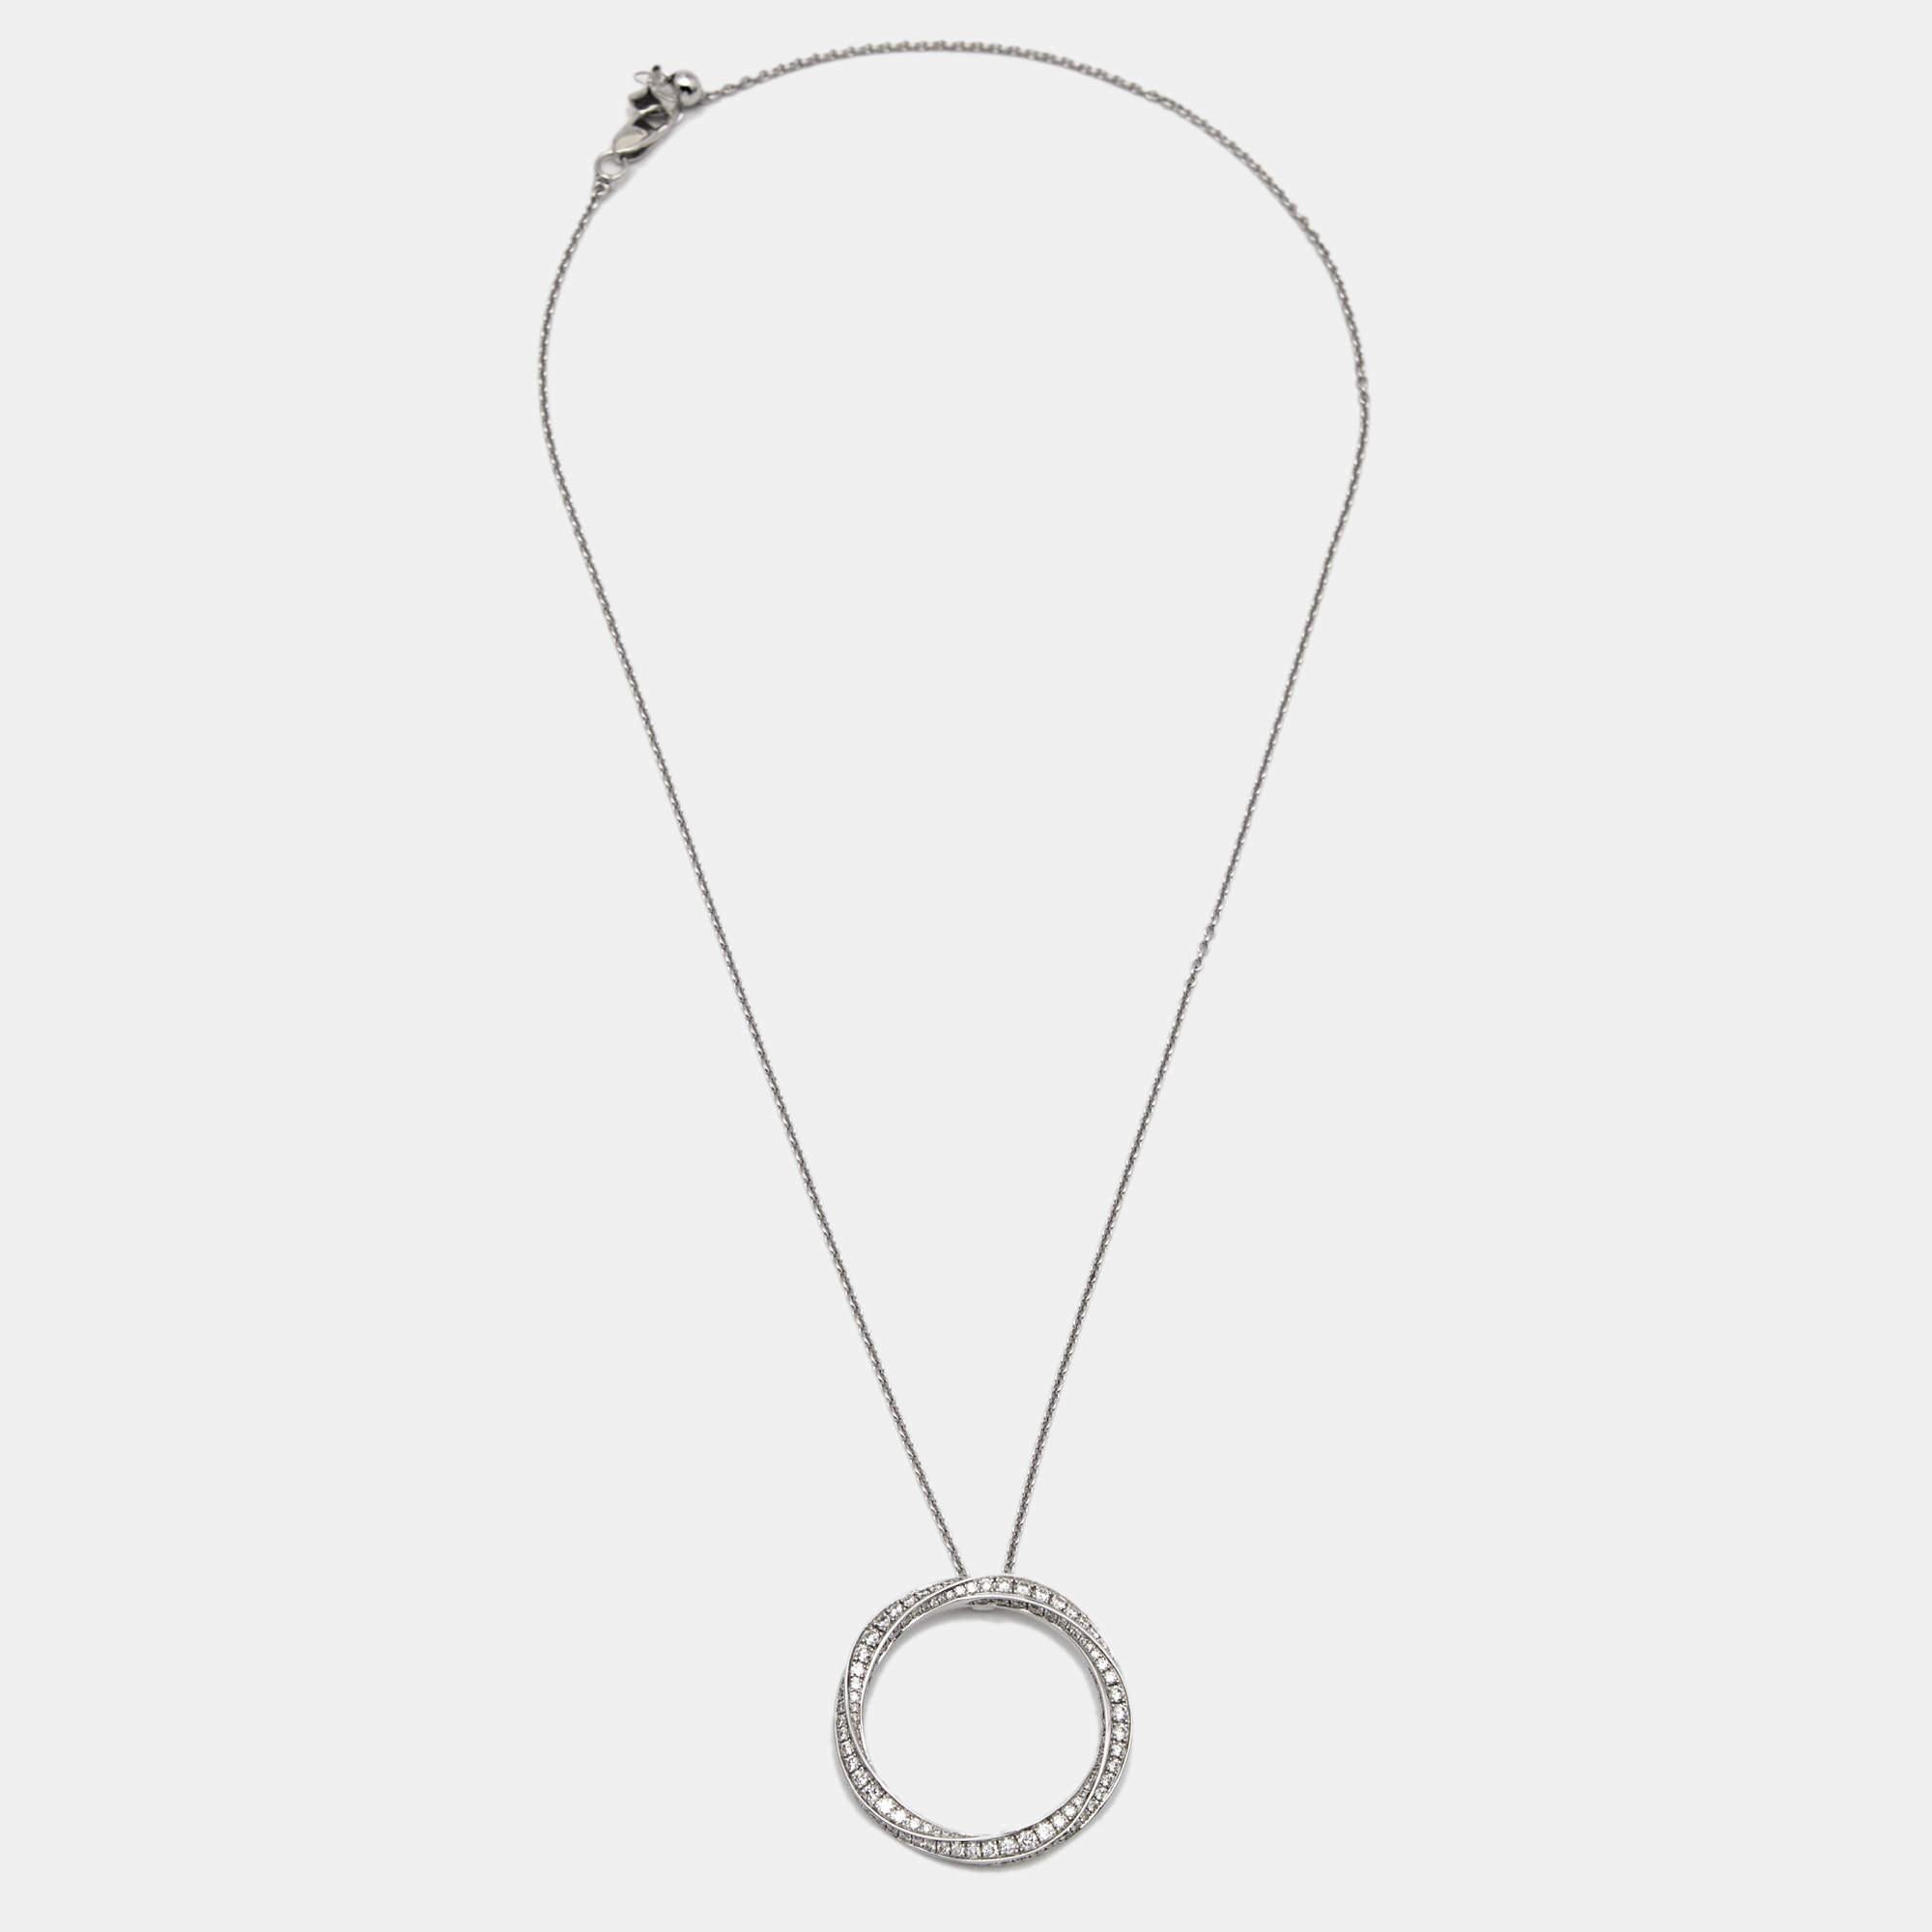 Modern, chic, and minimal, this Graff necklace is made for the woman of today! The pendant has been sculpted using 18k white gold and studded with carefully-placed diamonds on its smooth surface. The slender chain comes with a lobster